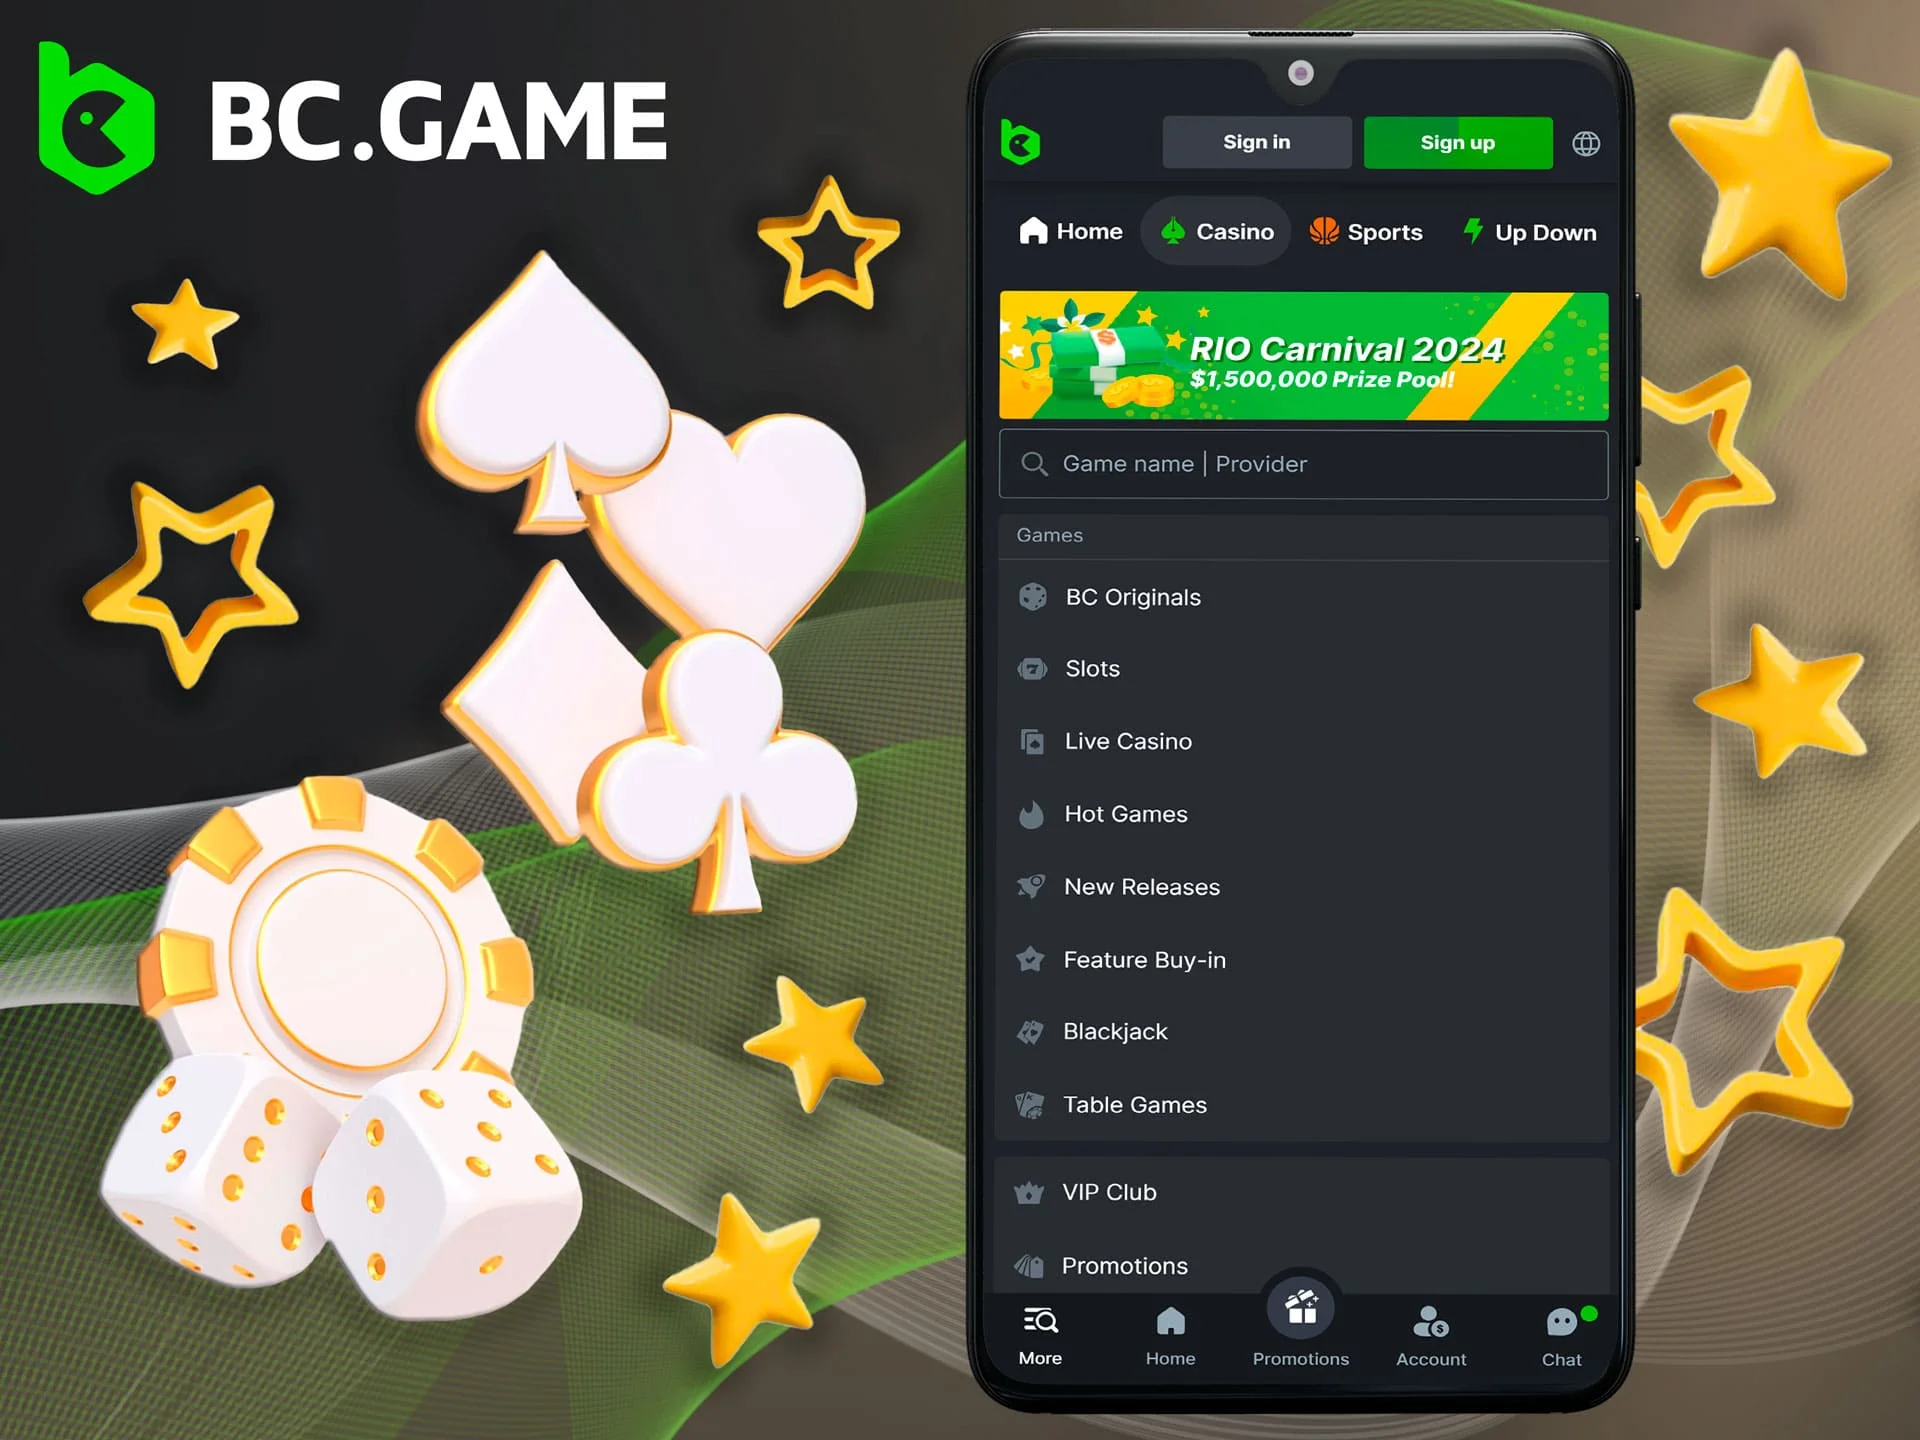 The BC Game casino app in India offers many features, bonuses and payment options.